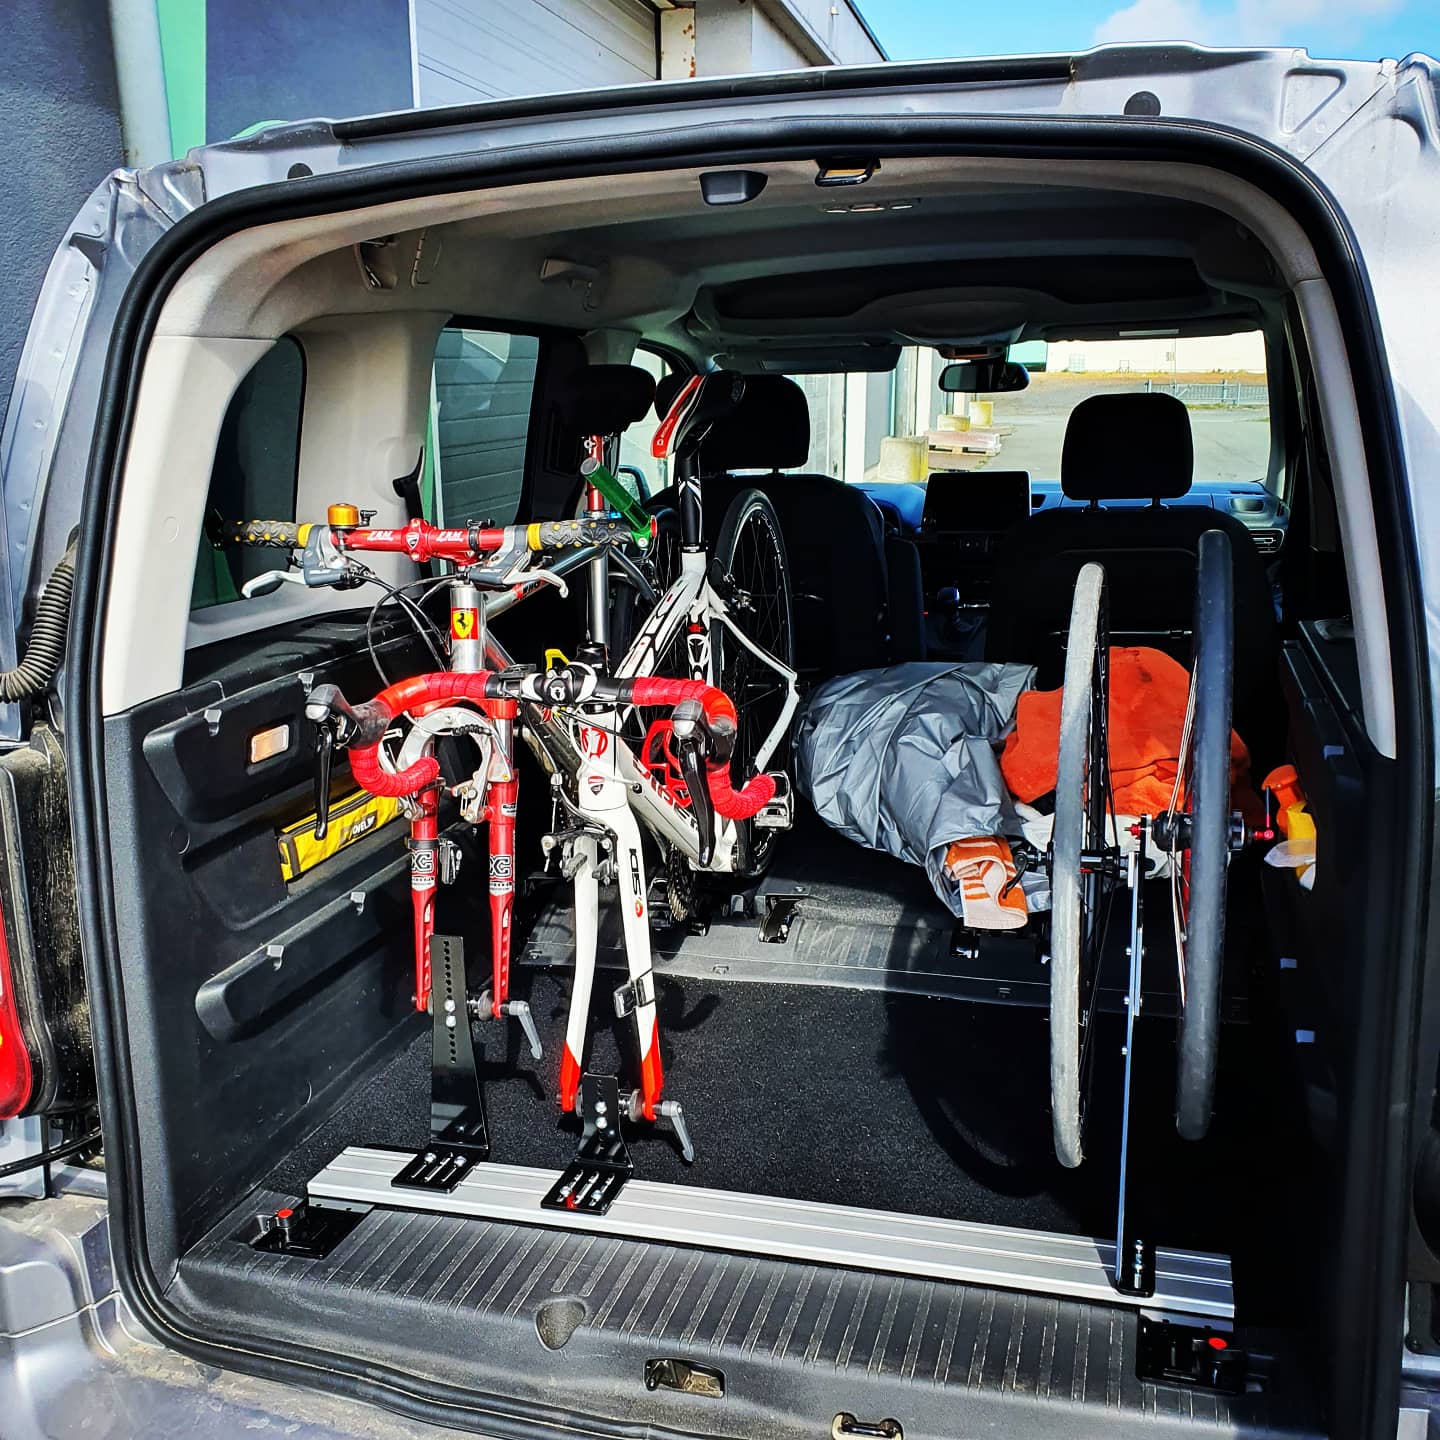 Bicycle carrier in Rifter_Berlingo_Combo_proace city